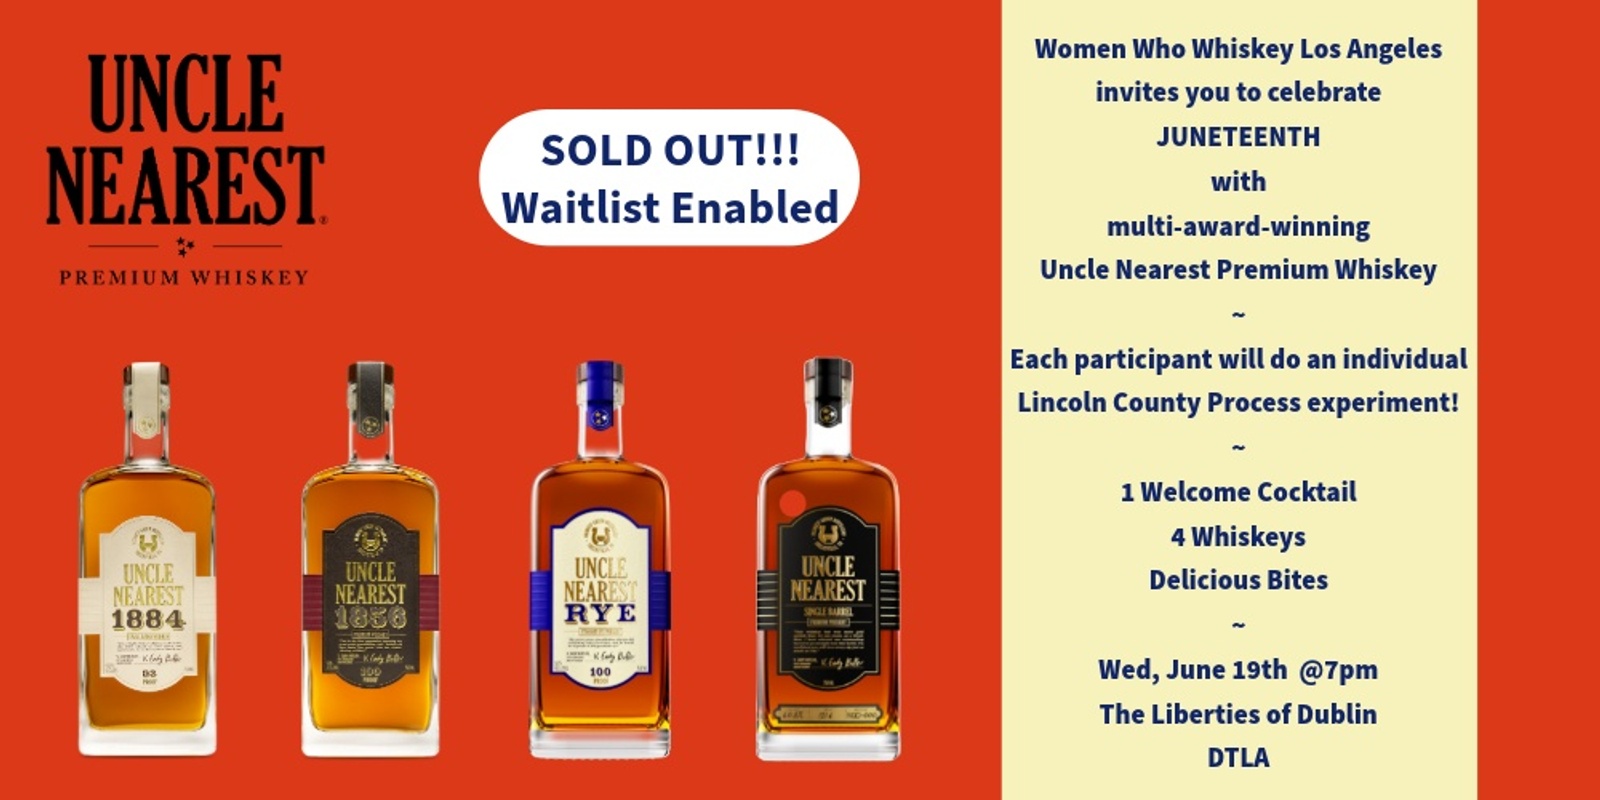 Banner image for Uncle Nearest Premium Whisky Juneteenth Event